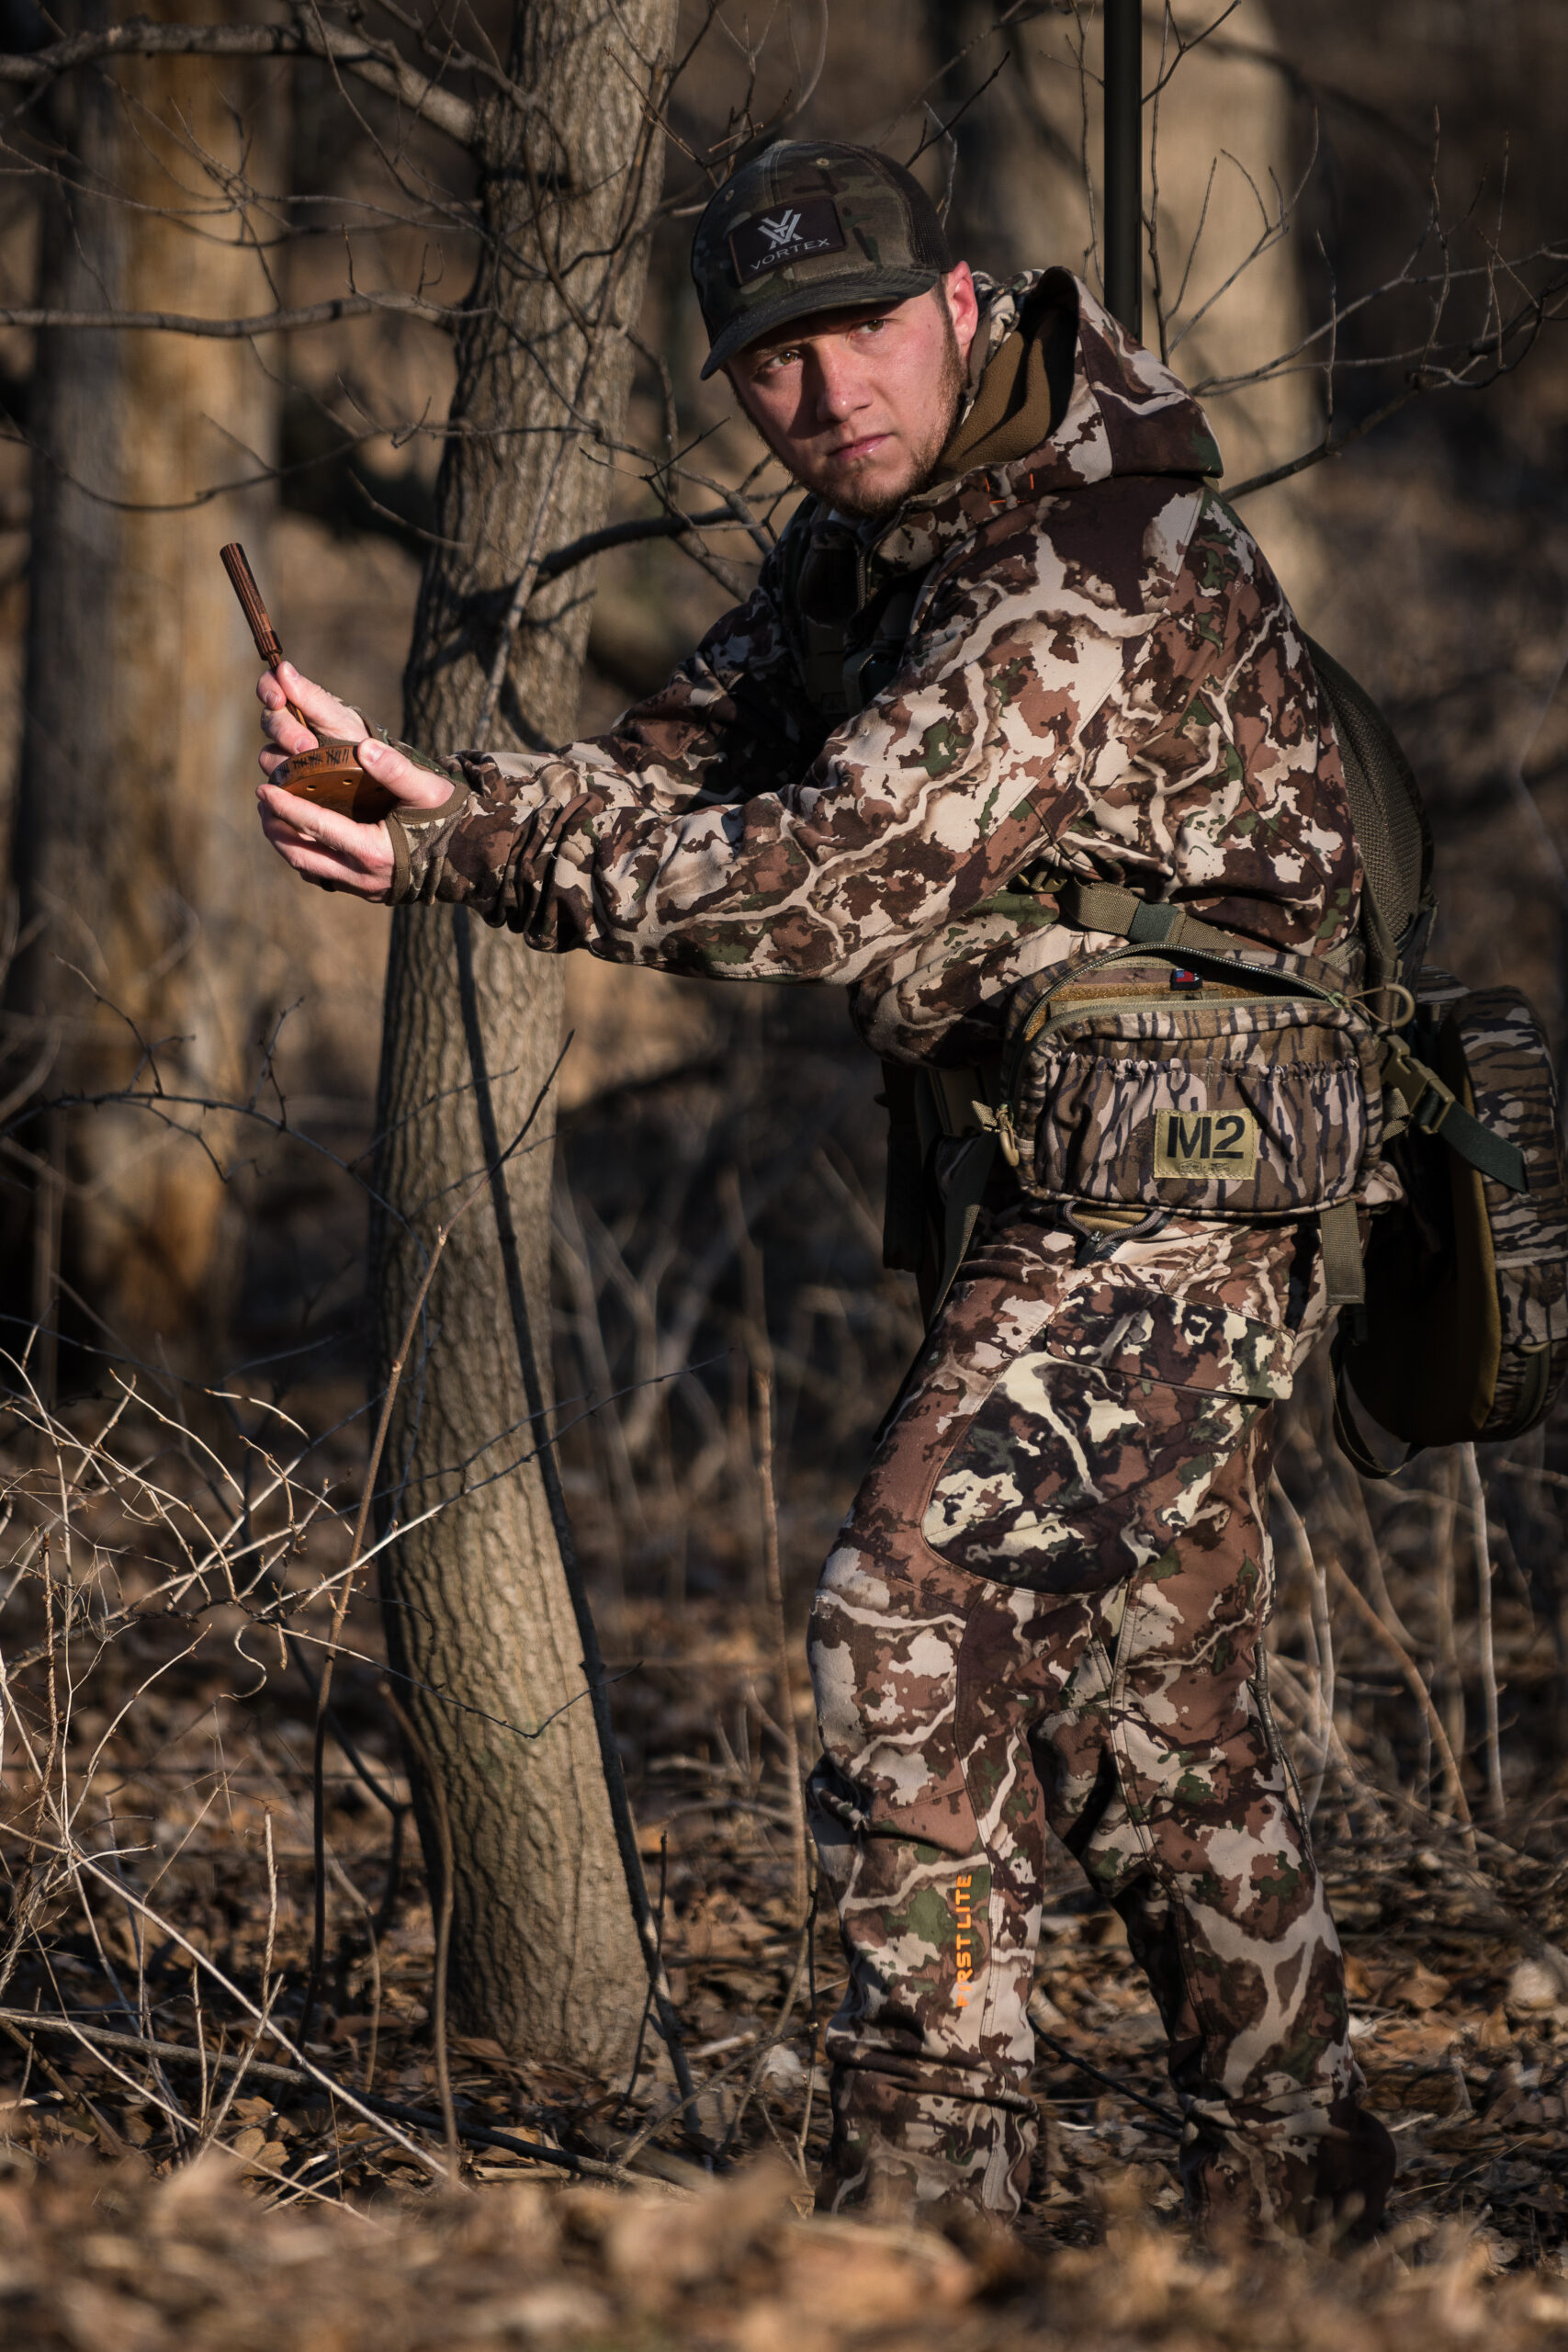 Tethrd M2 Turkey Vest Review: Is It Worth the Hype? | Outdoor Life